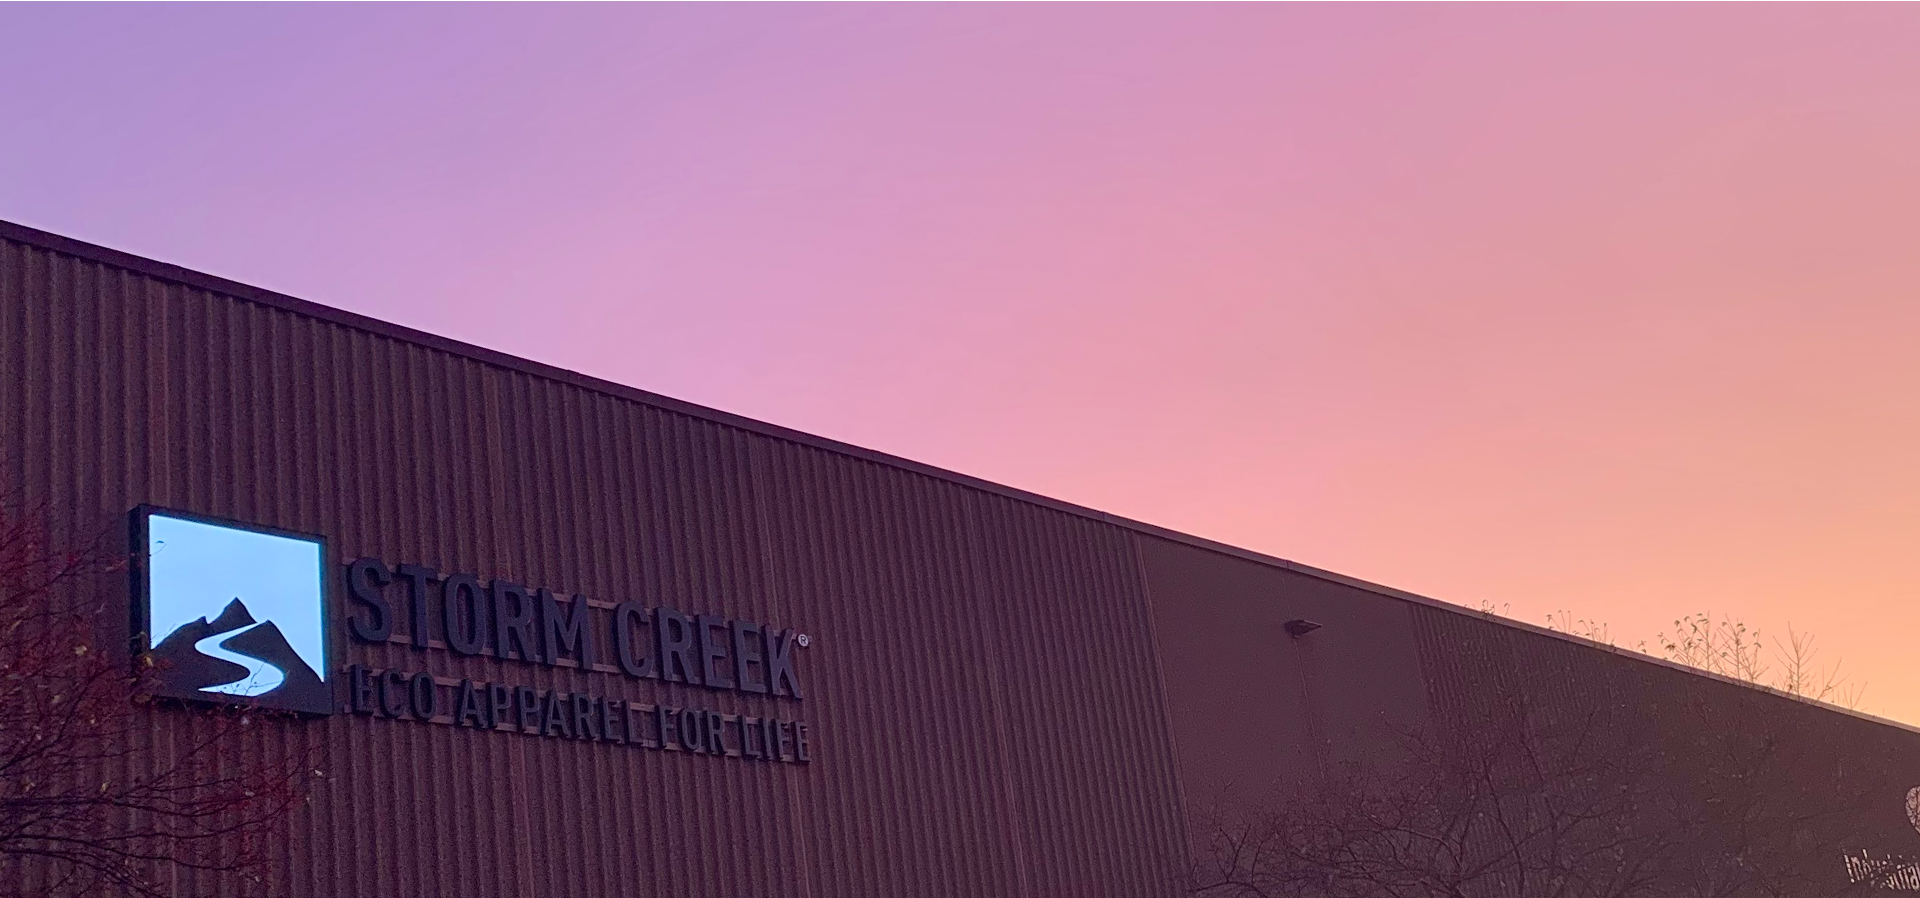 The Storm Creek office with a beautiful sunset behind it